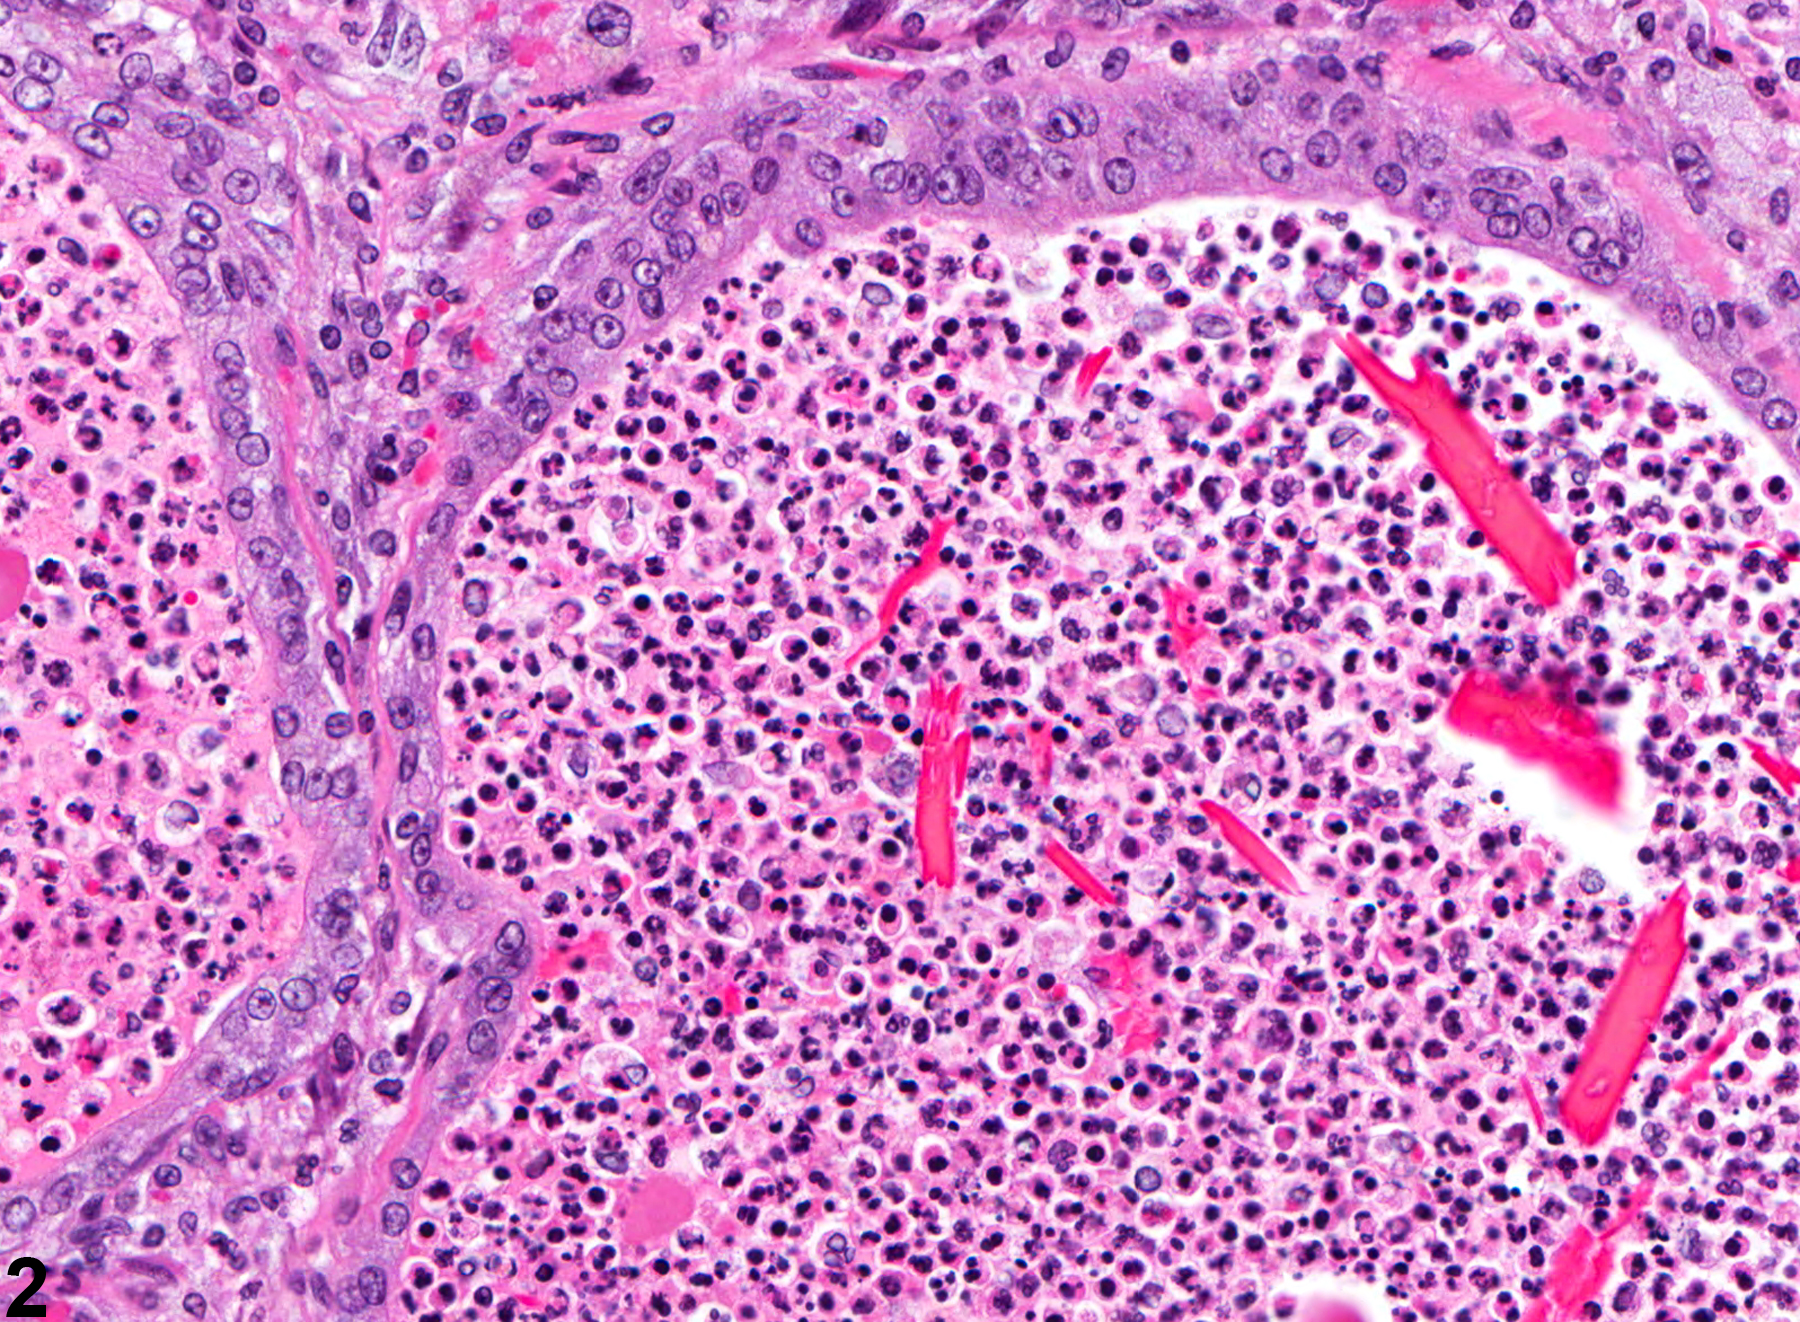 Image of inflammation in the prostate from a male F344/N rat in a chronic study